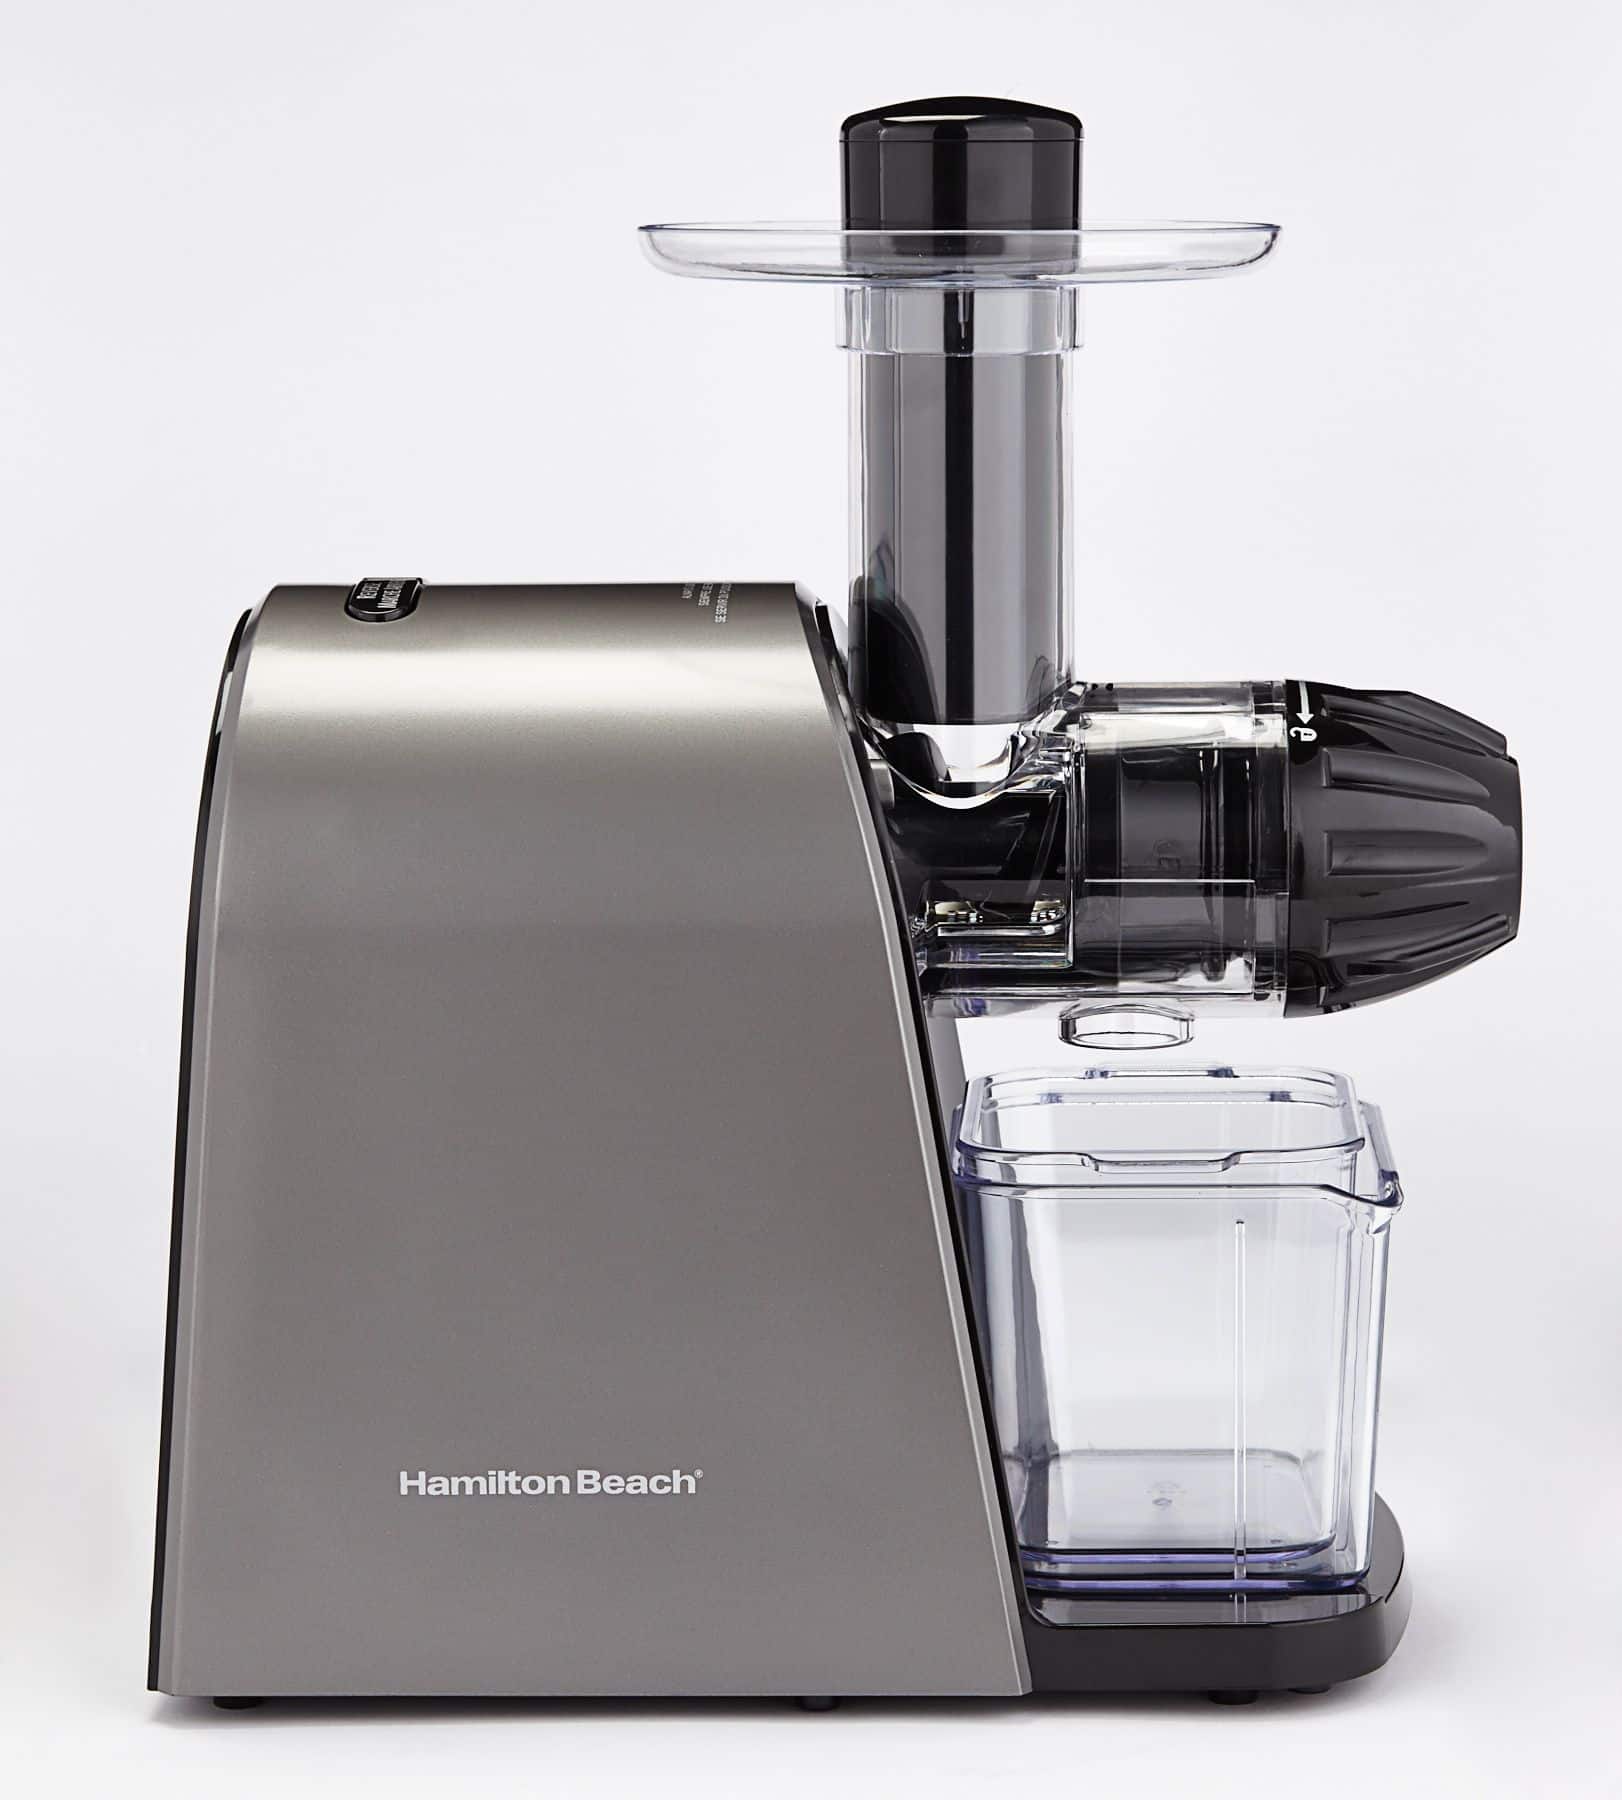 https://media-www.canadiantire.ca/product/living/kitchen/kitchen-appliances/0430024/hamilton-beach-slow-juicer-ca5bf6ed-0a60-42c8-a372-3779daf5b431-jpgrendition.jpg